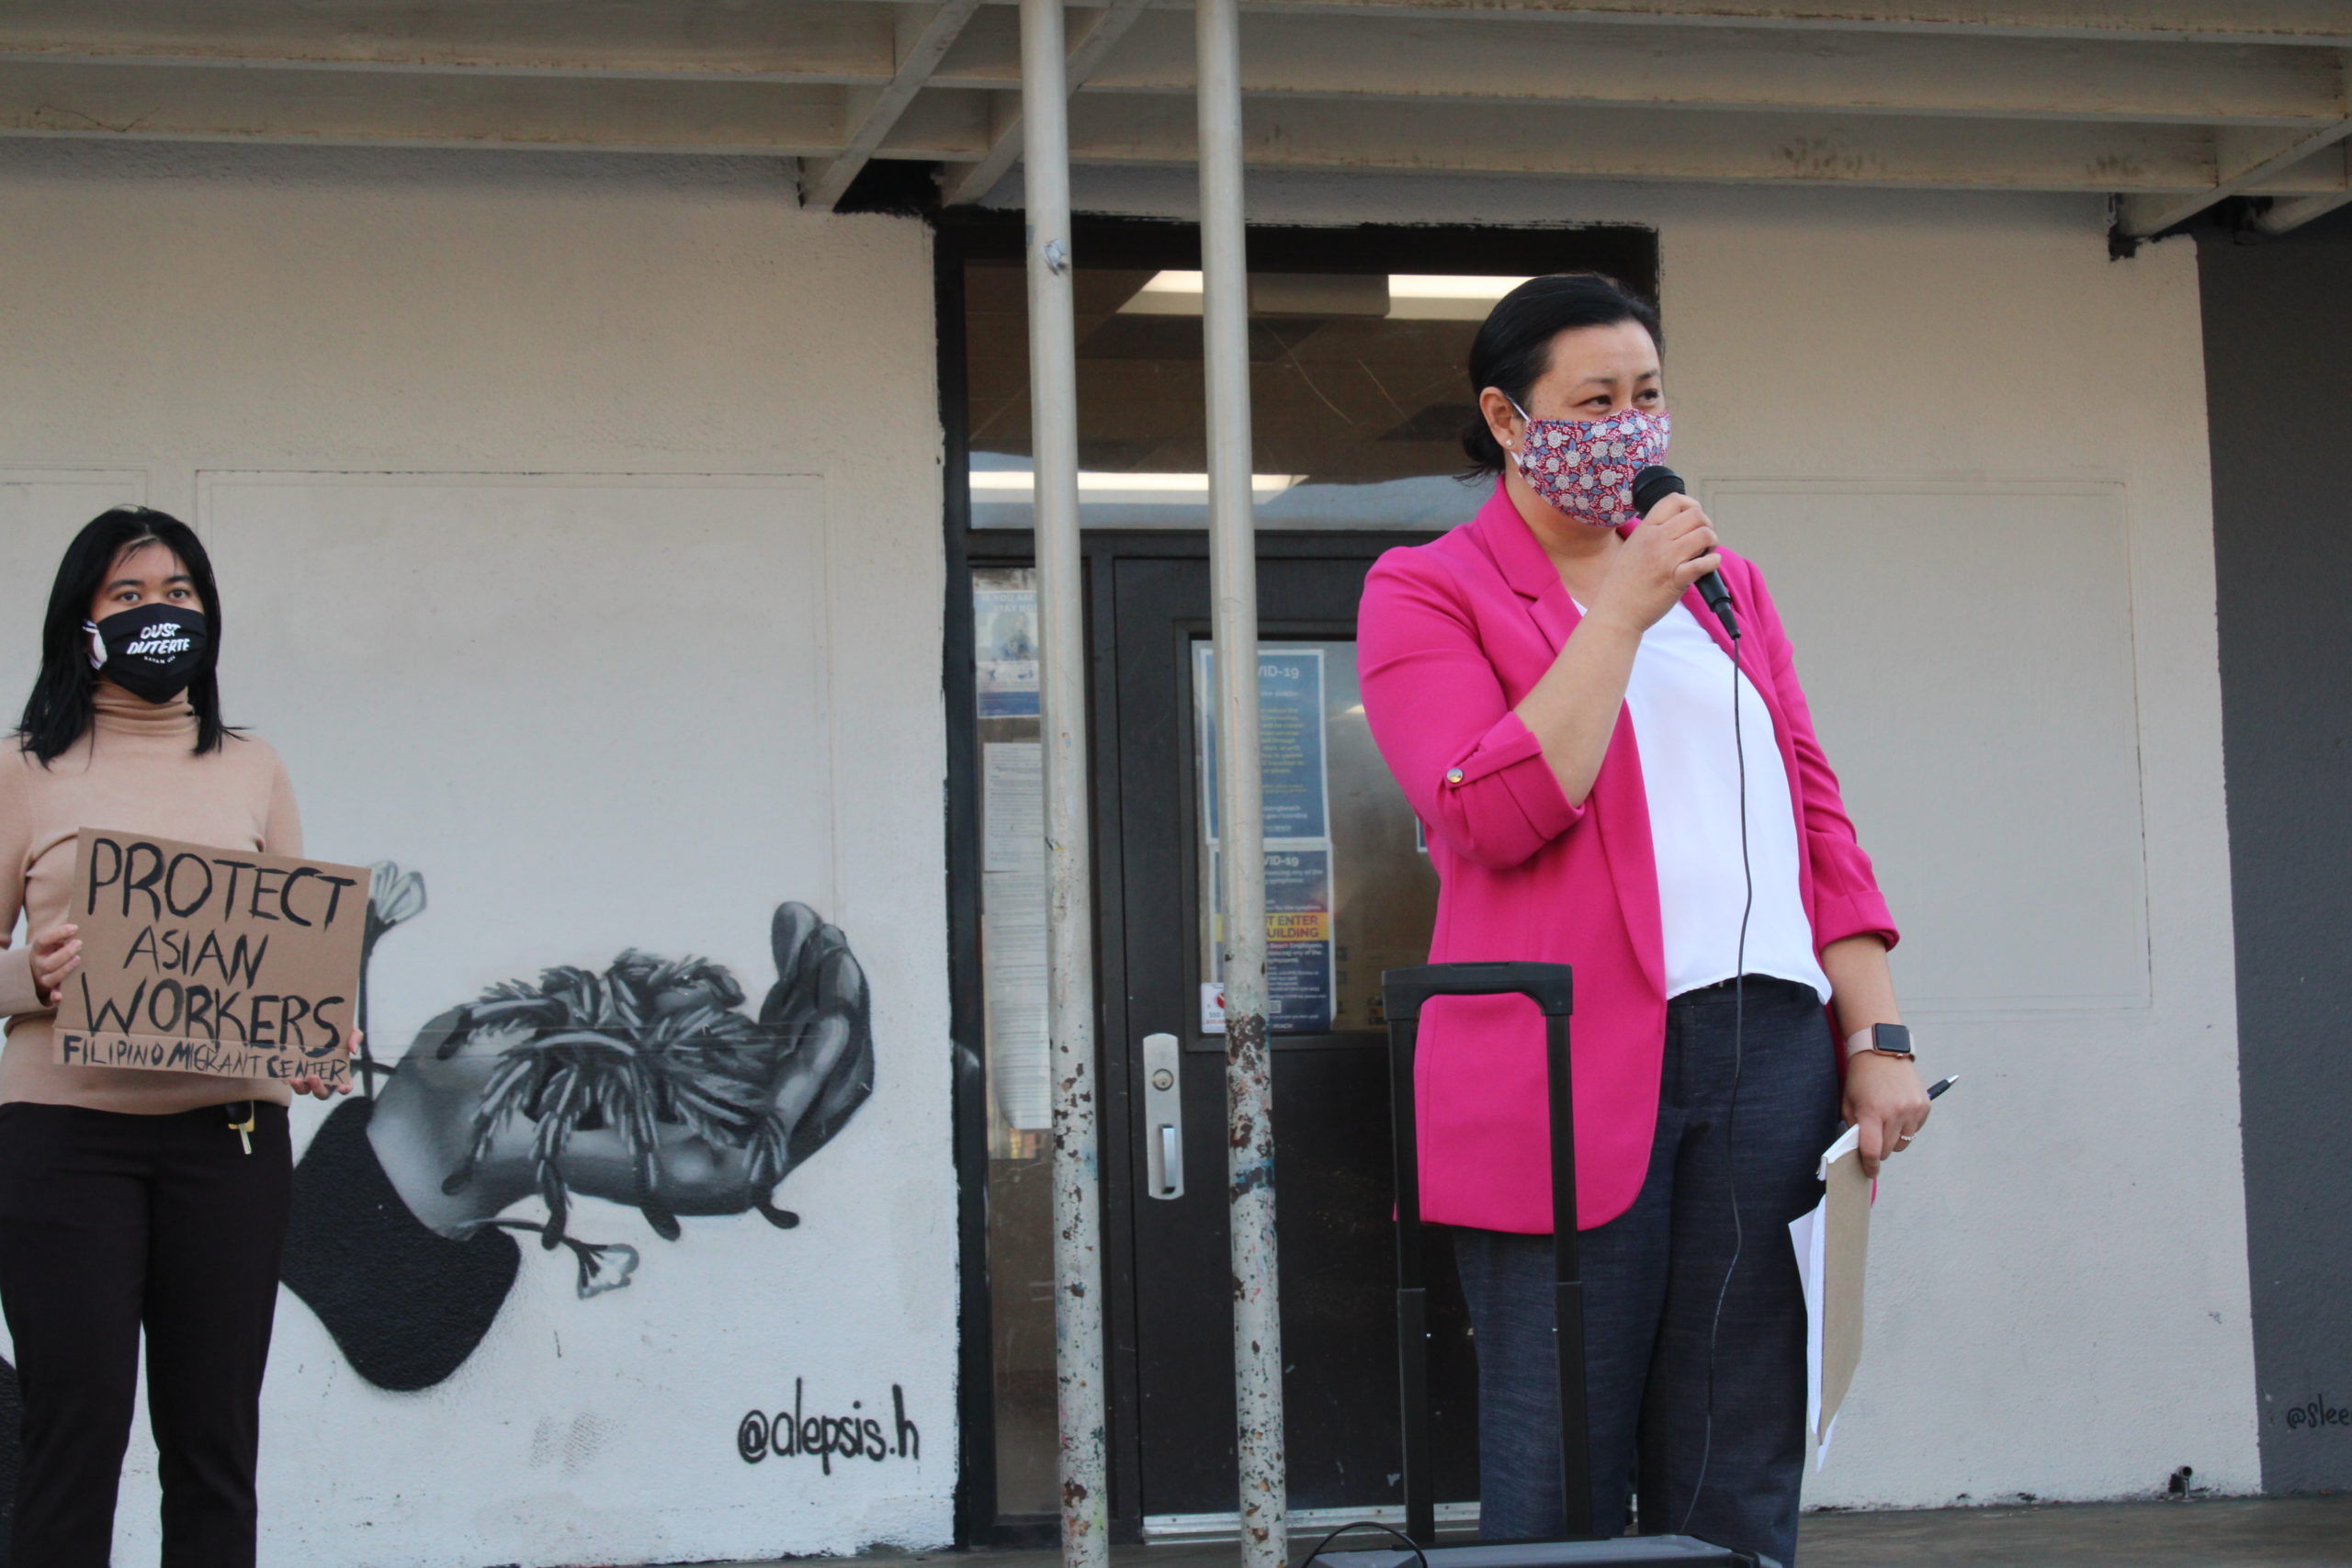 Councilmember Suely Saro addresses the crowd that gathered at MacArthur park.